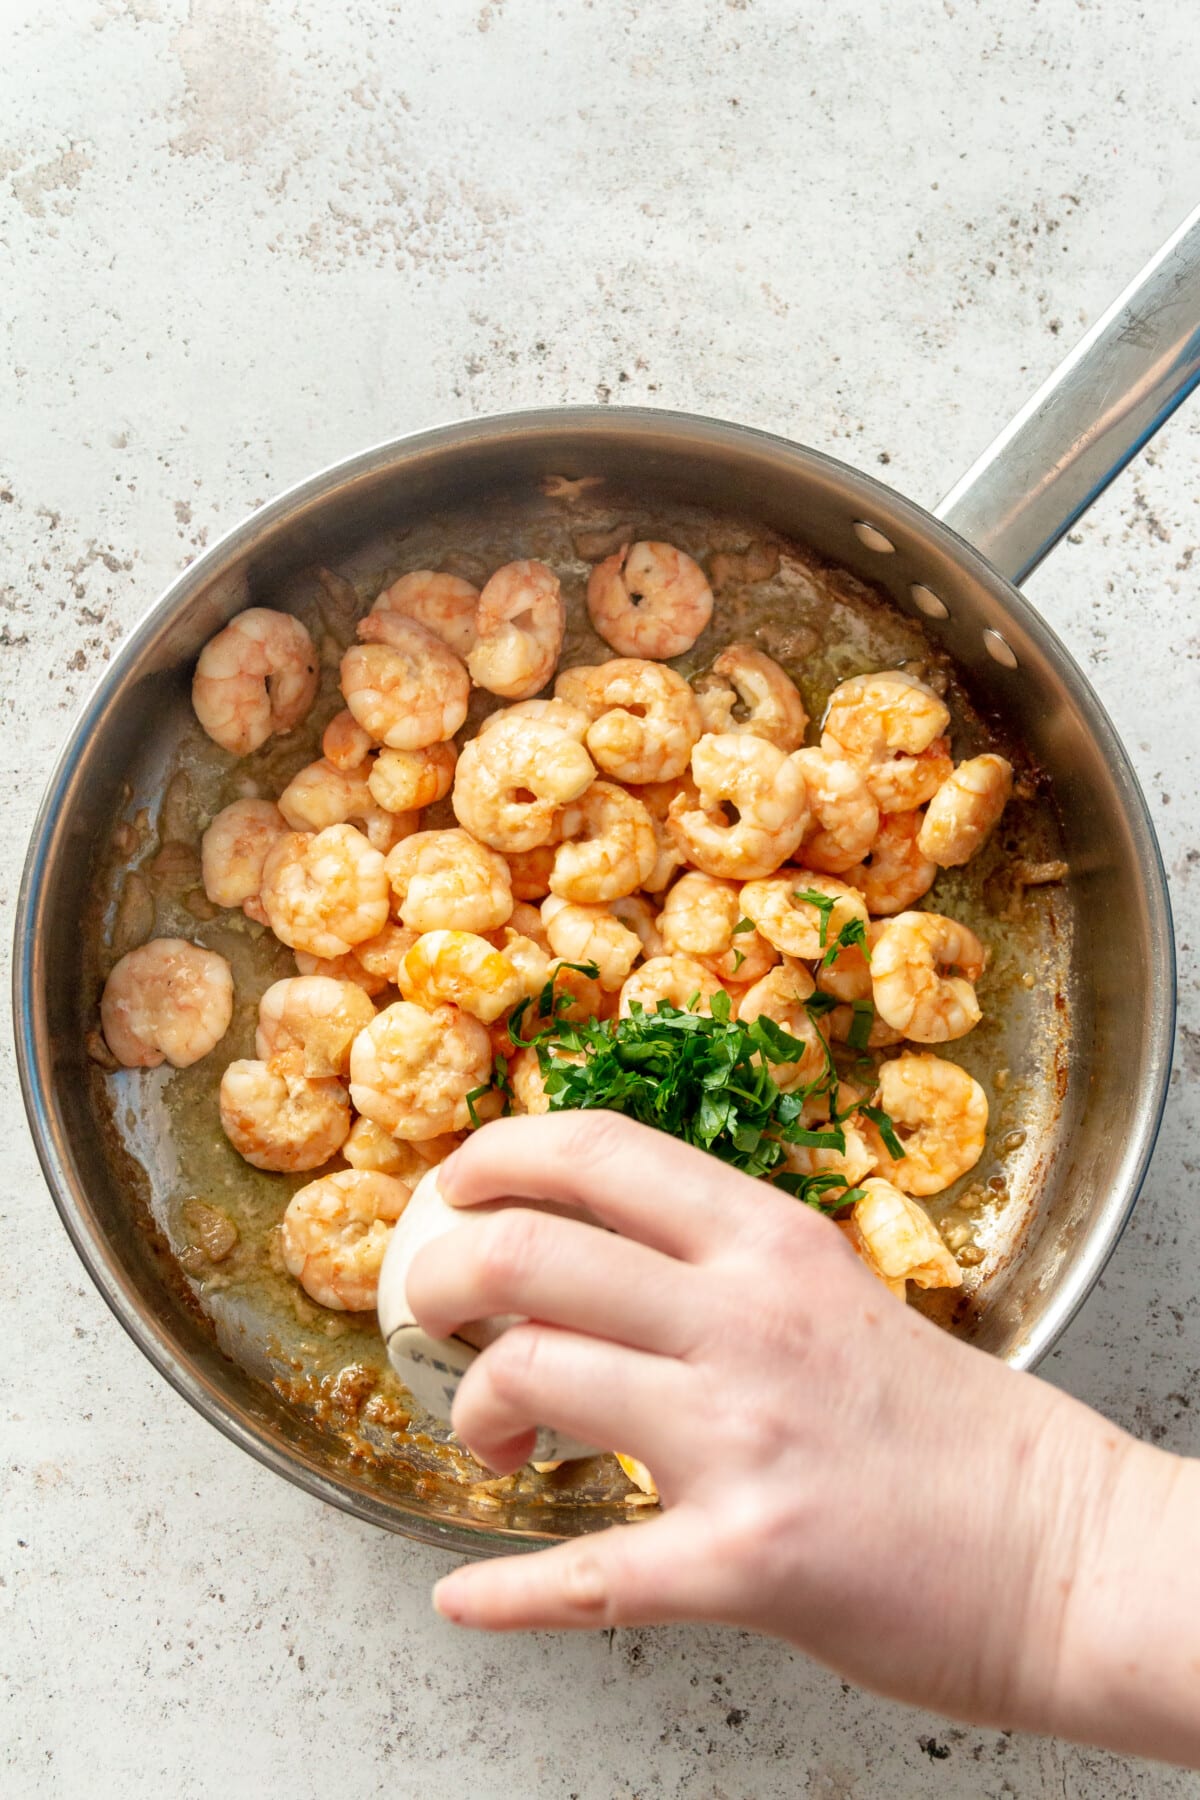 A hand is shown pouring a bowl of chopped cilantro over the top of the shrimp in the pan.